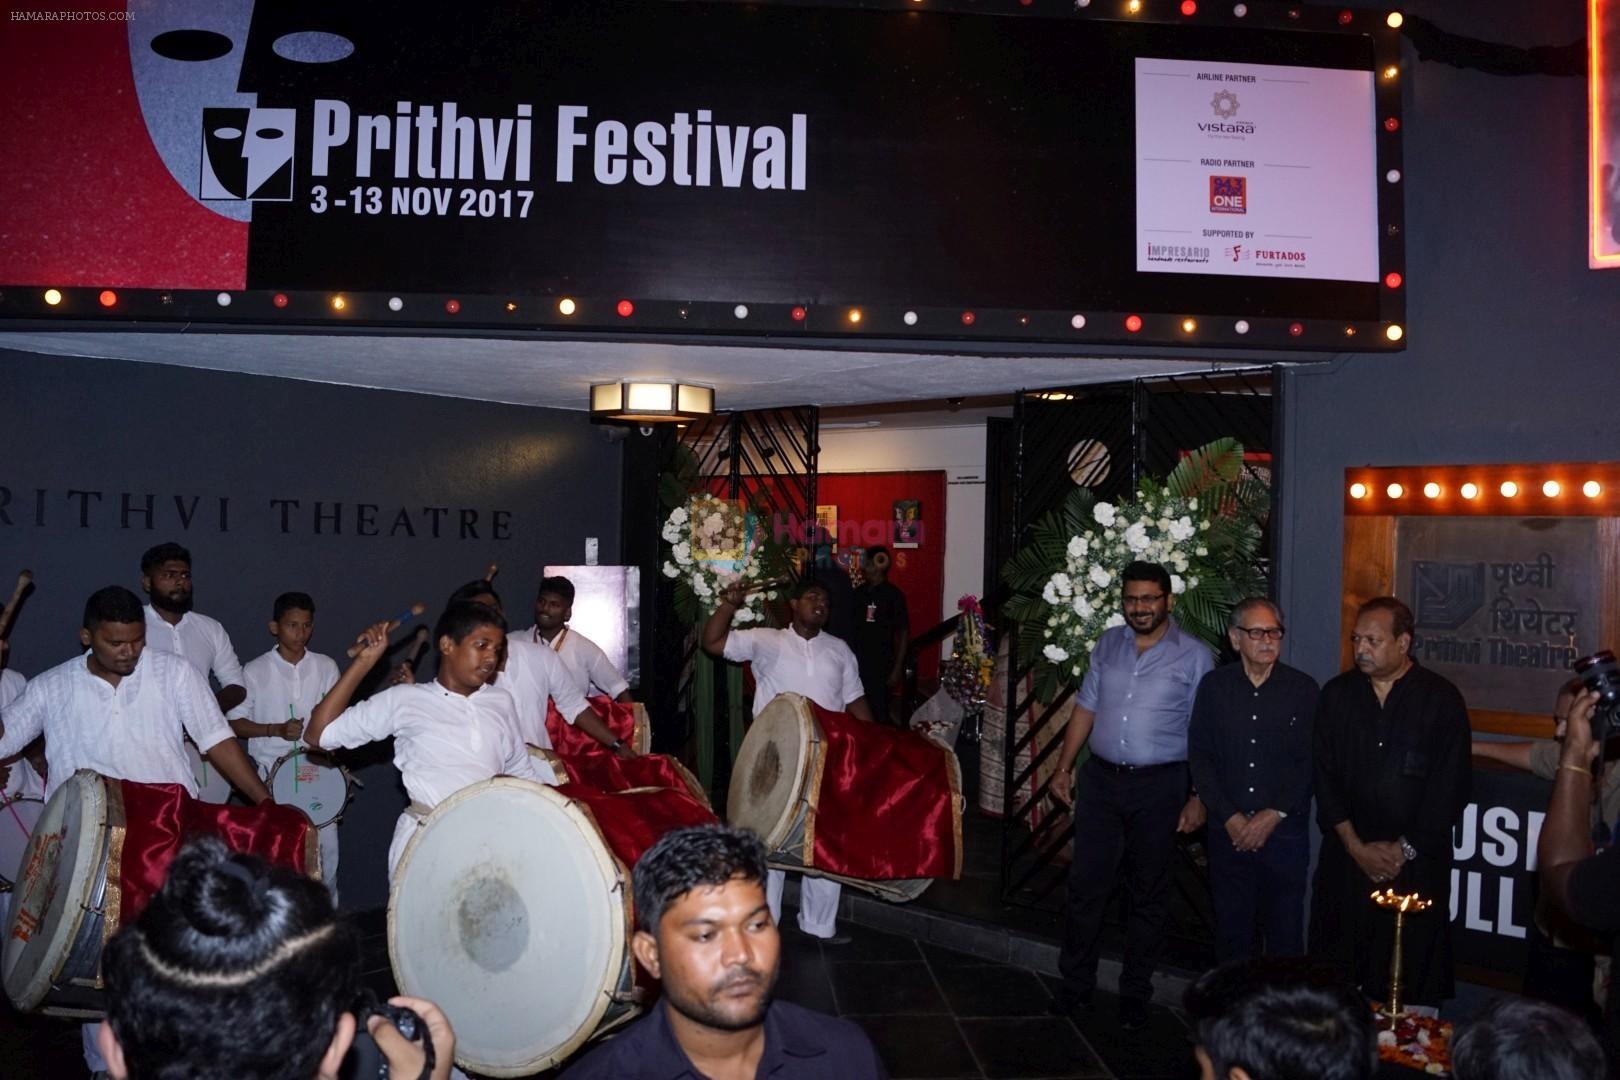 Attend Opening Ceremony Of Prithvi Theatre Festival on 3rd Nov 2017